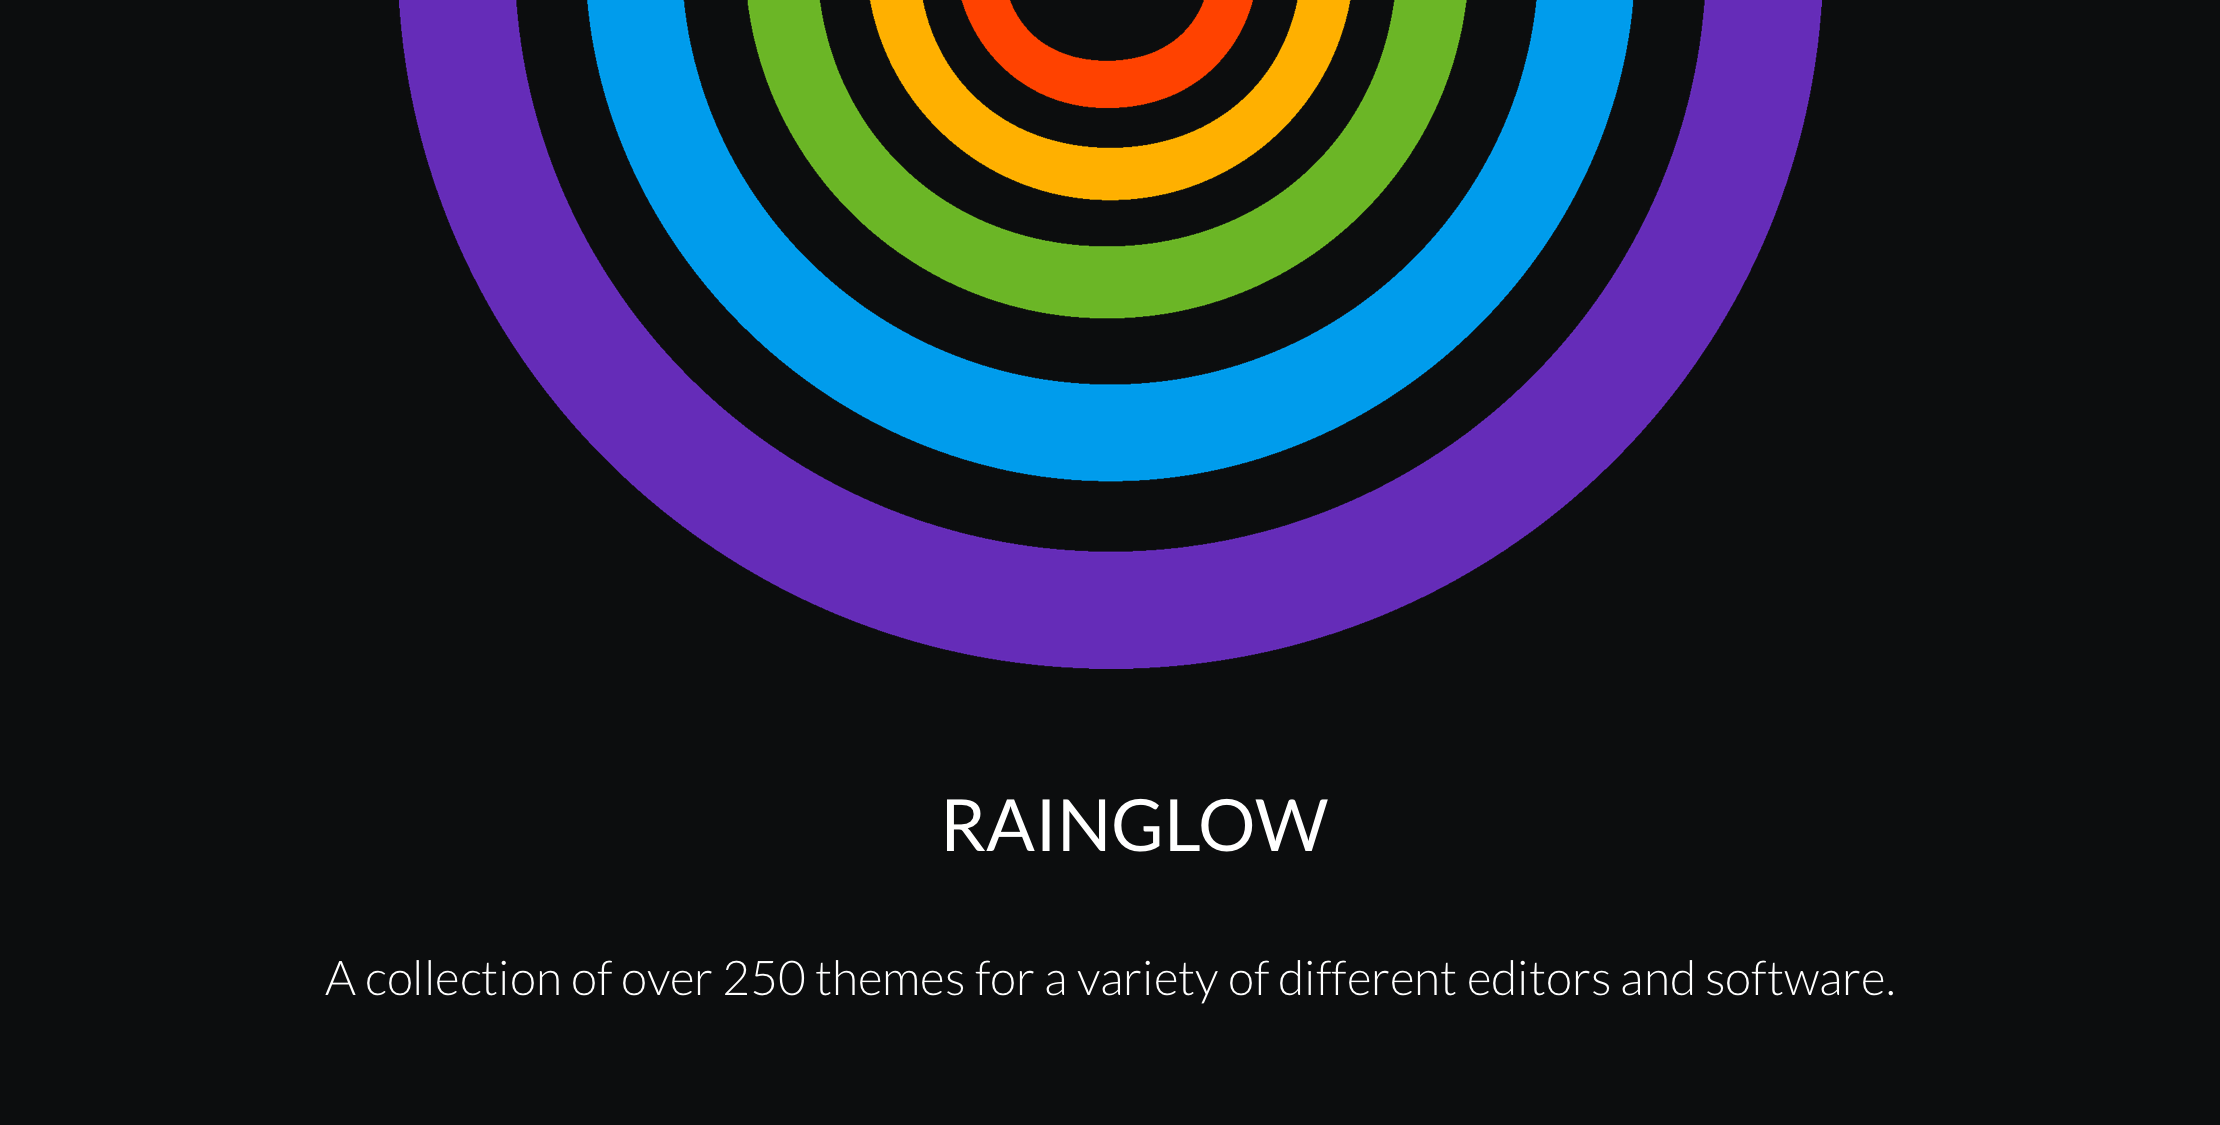 Rainglow Editor Themes By Dayle Rees image